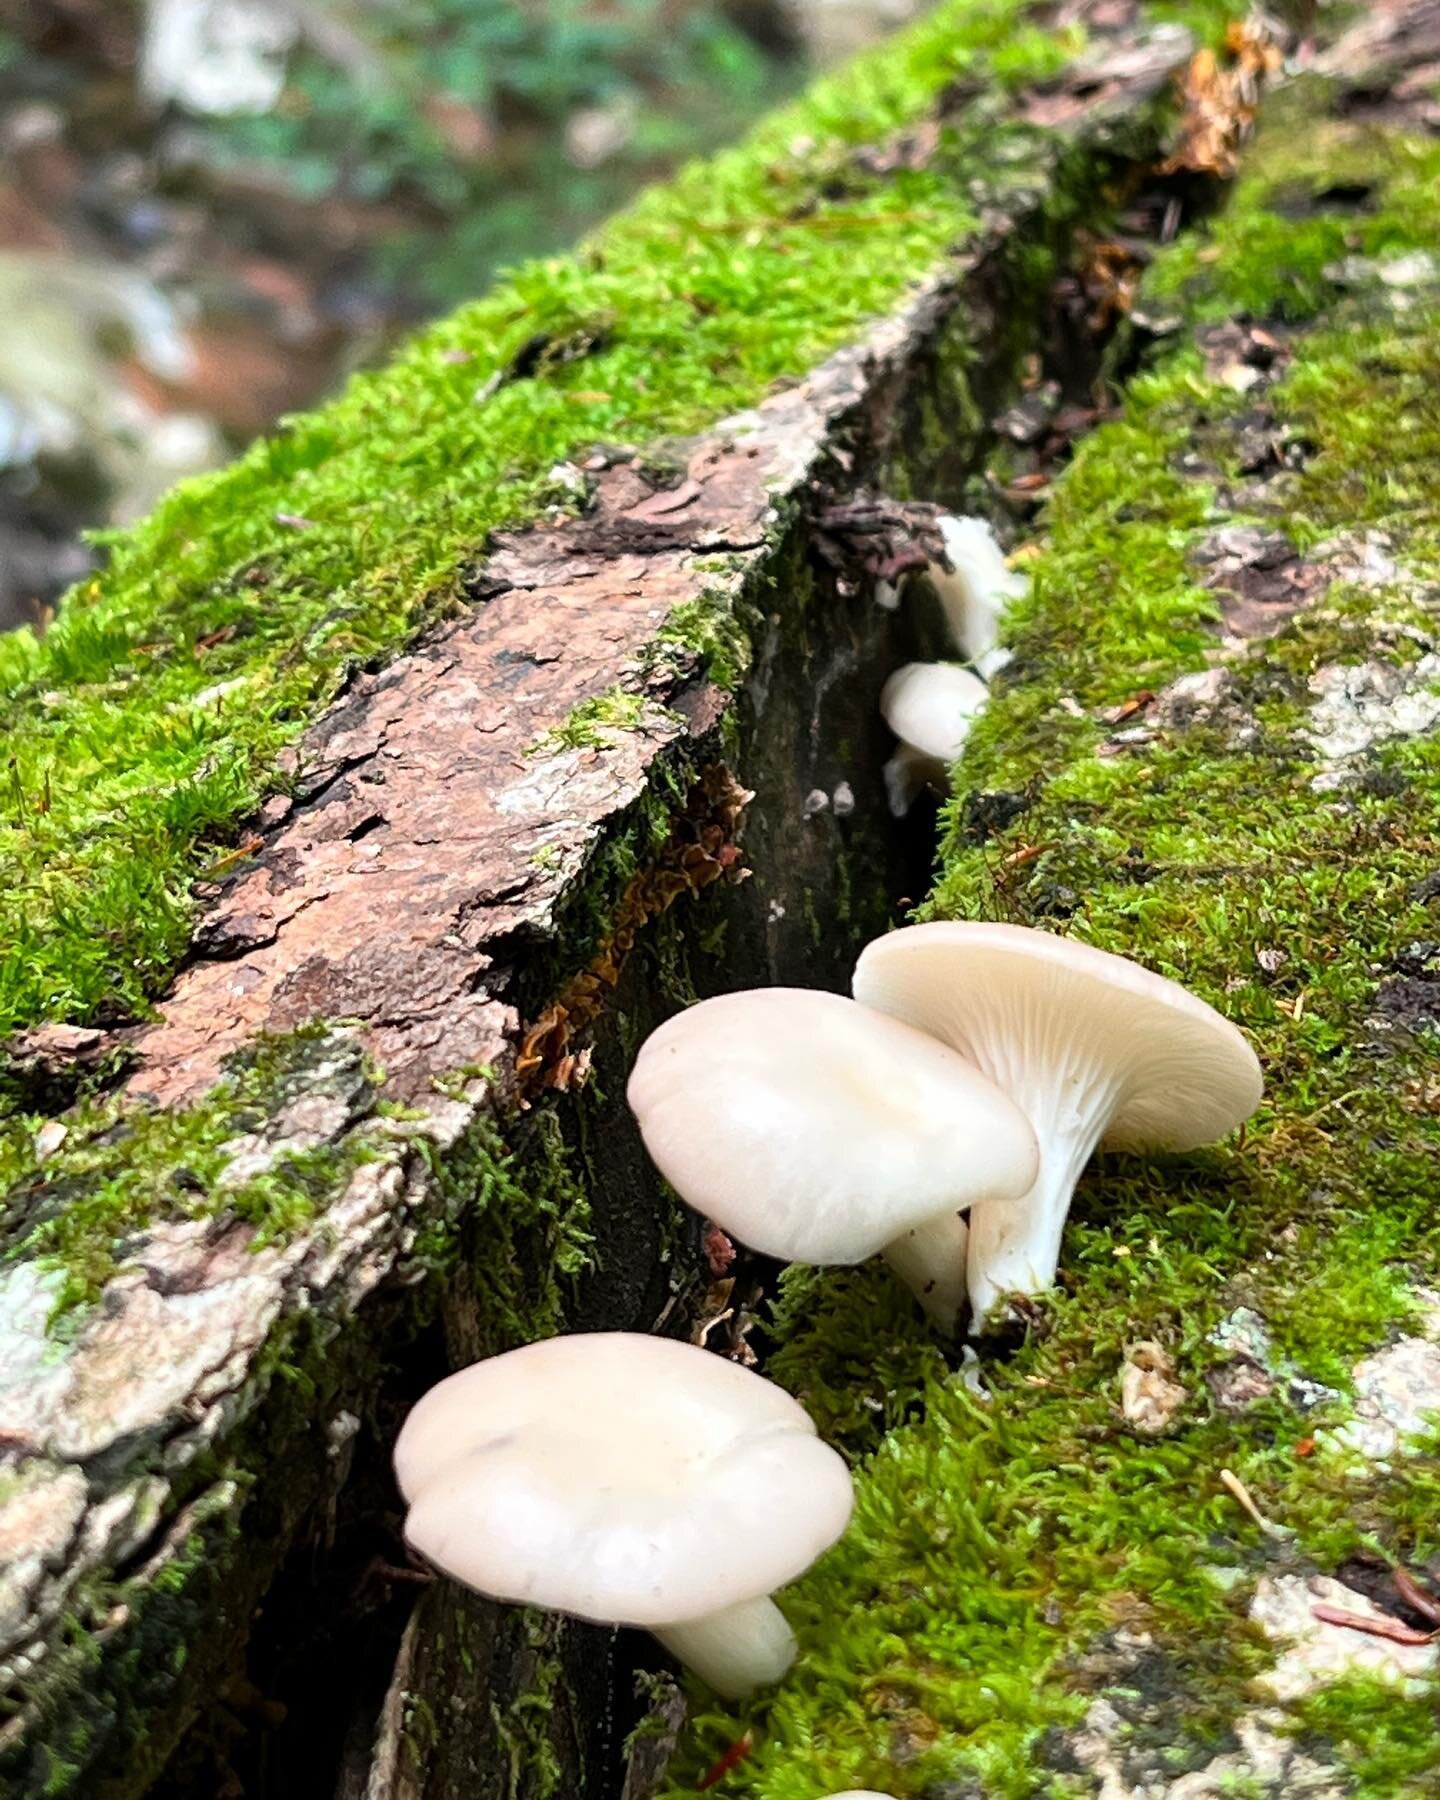 All these friends popped out of a fallen tree which lies across my local stream. 

This tree was the original location where I discovered myself as what would later be known to me as Little Mushroom. 

This name embodies the spirit of a deep part of 